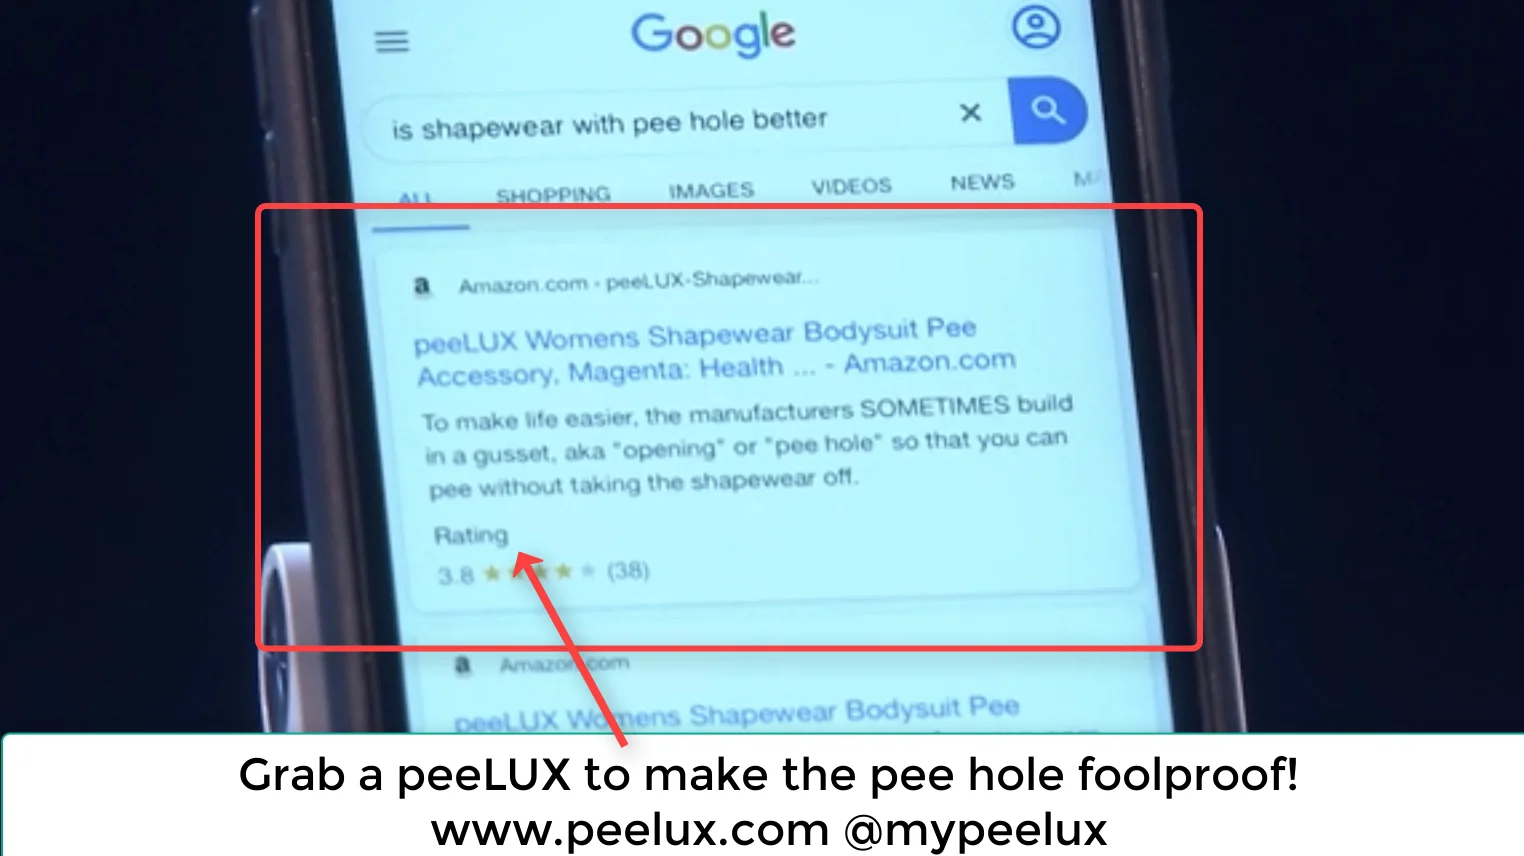 How to Use peeLUX - Peeing in Shapewear Made Easy on Vimeo